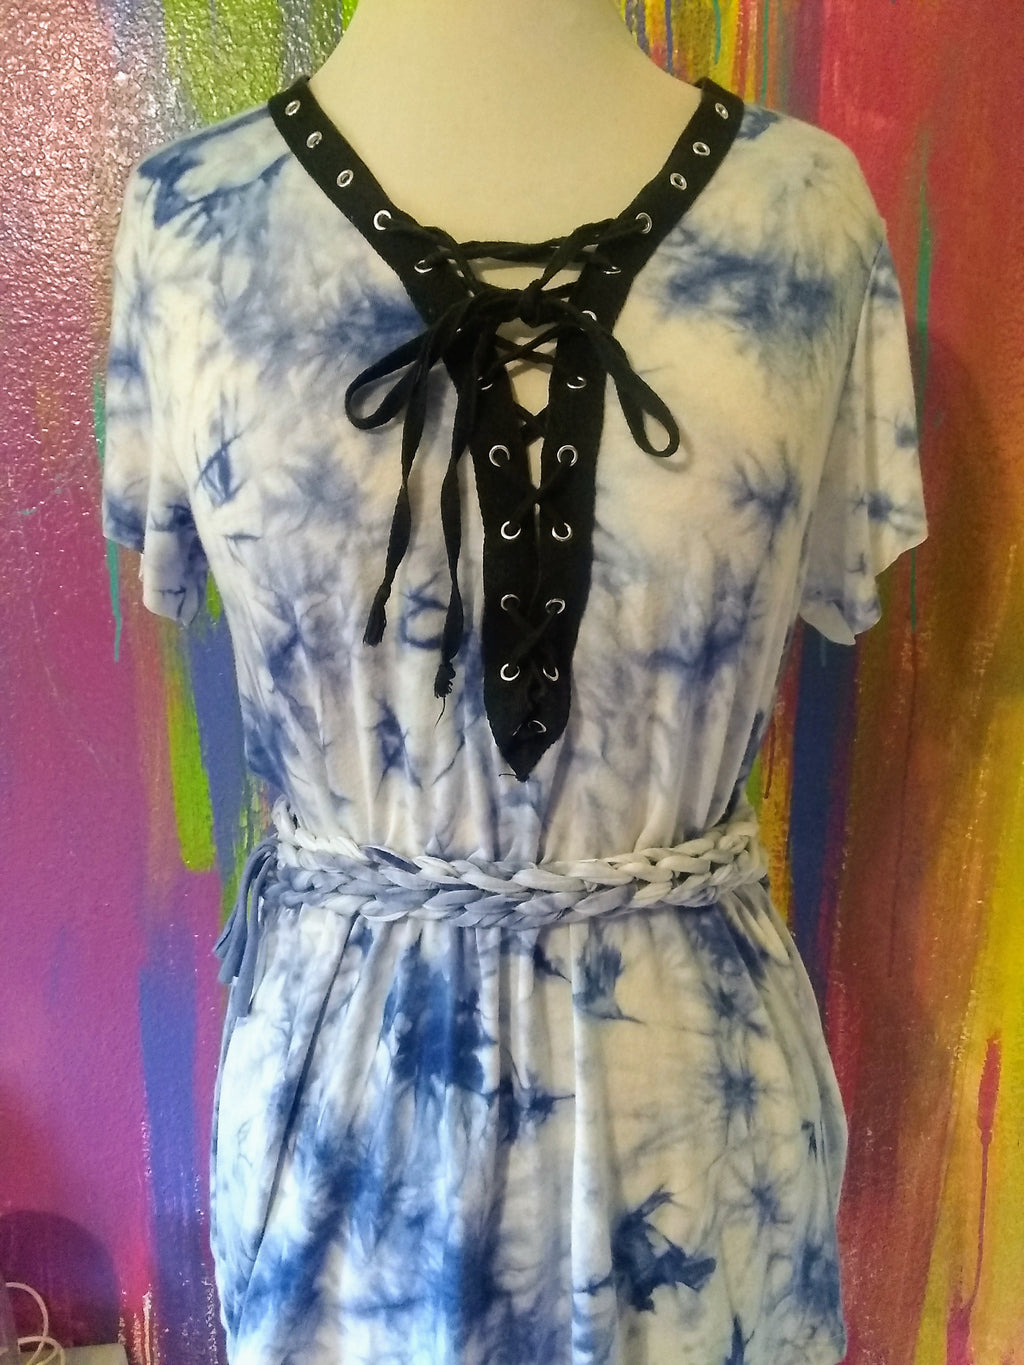 Upcycled White and Blue Tie Dye with Lace Up Front Waist Cut and Braided Custom Cut Women's Tee